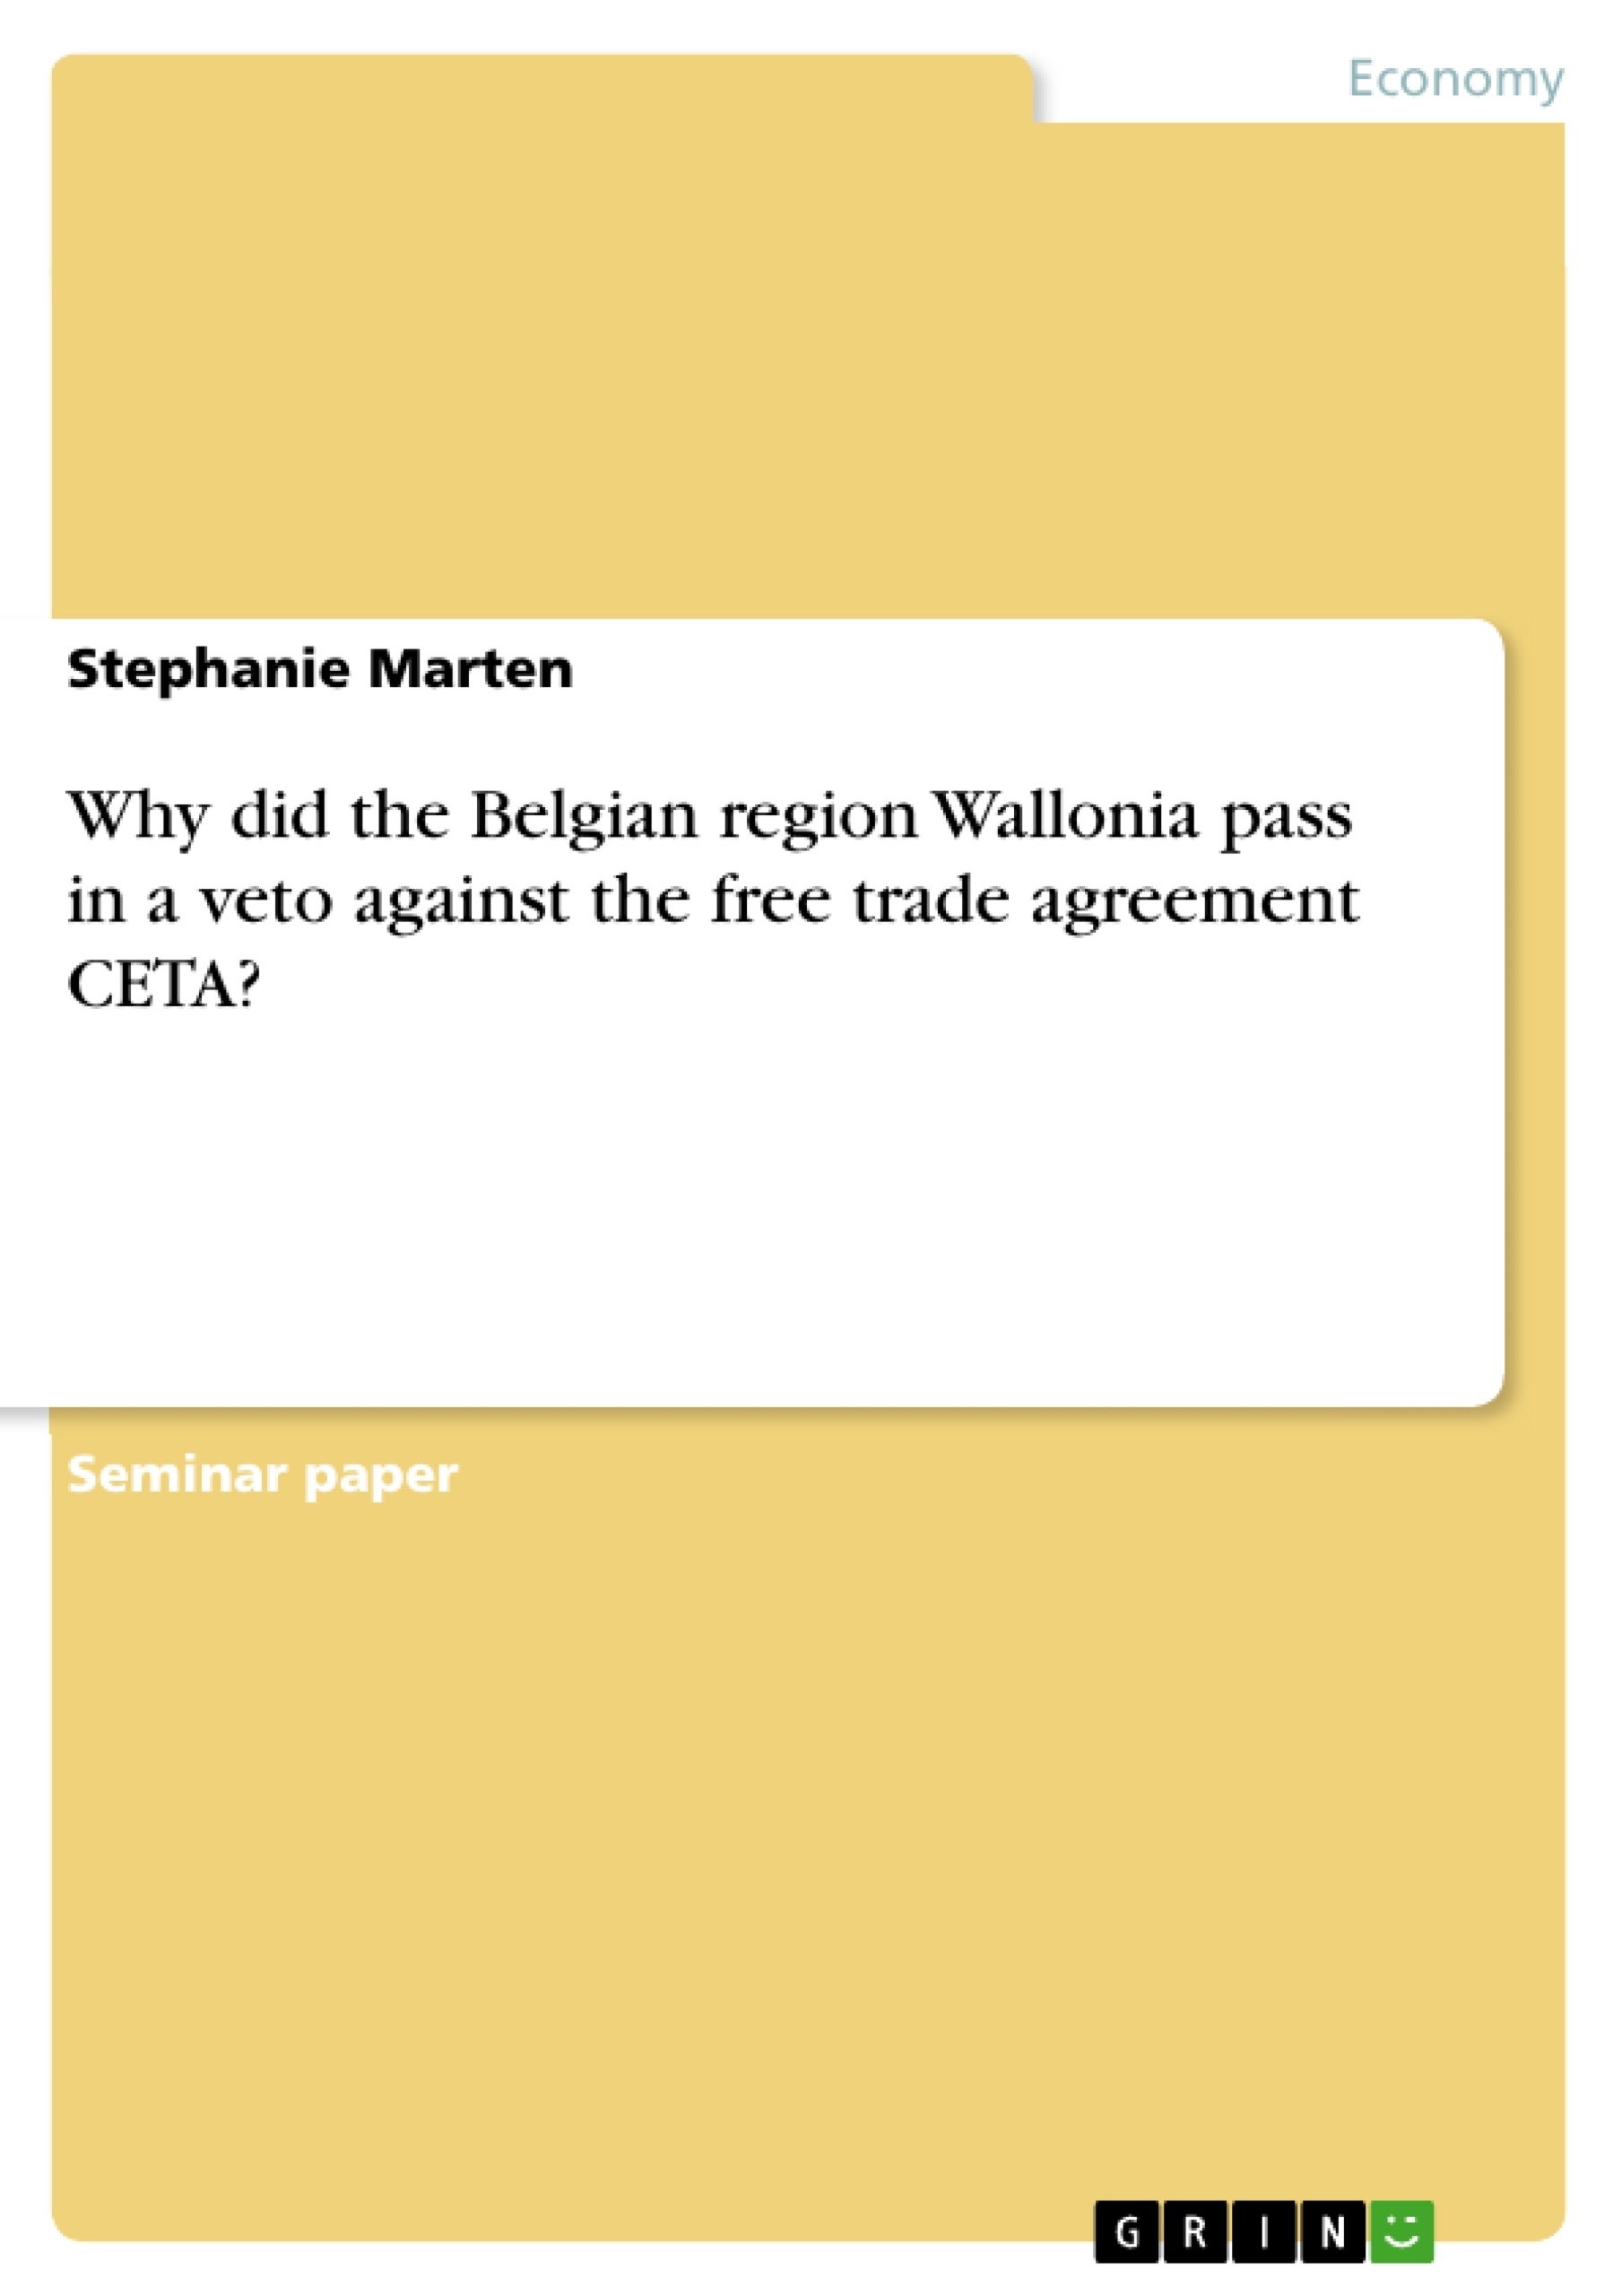 Titel: Why did the Belgian region Wallonia  pass in a veto against the free trade agreement CETA?